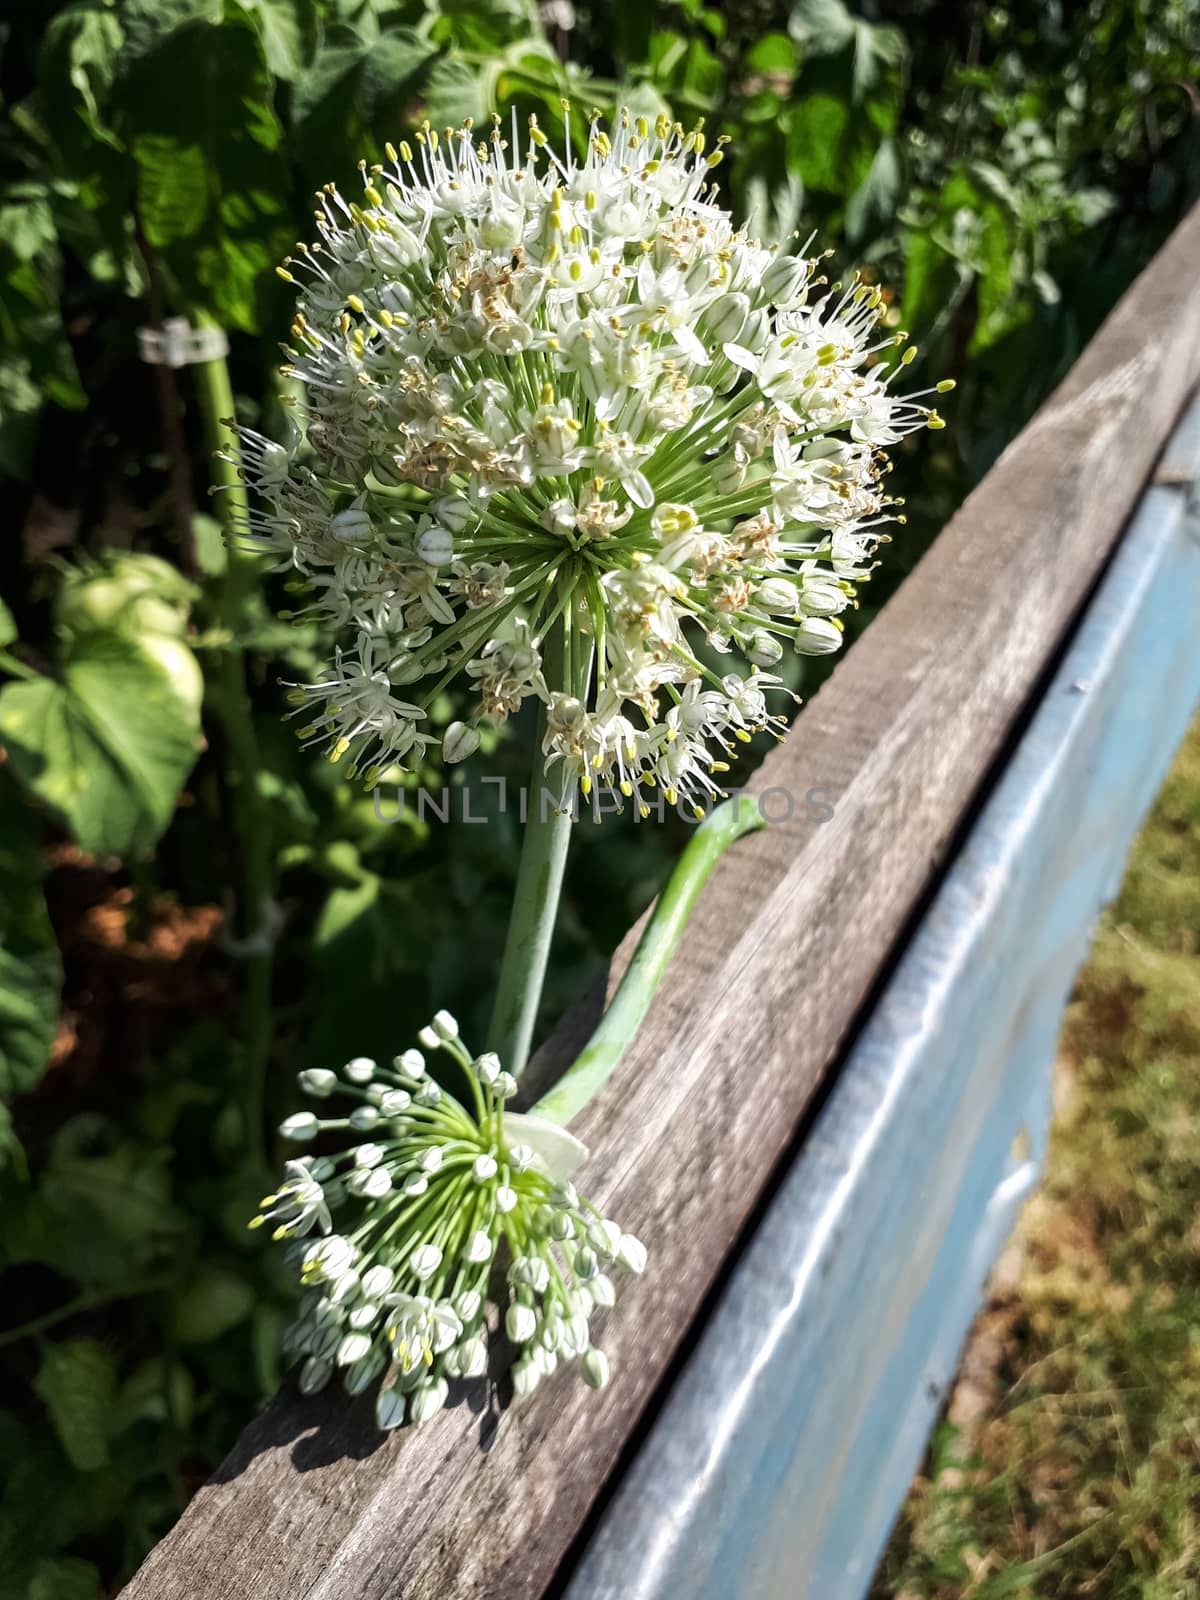 Blossoming onion, Onion Inflorescence, so flowered onions.